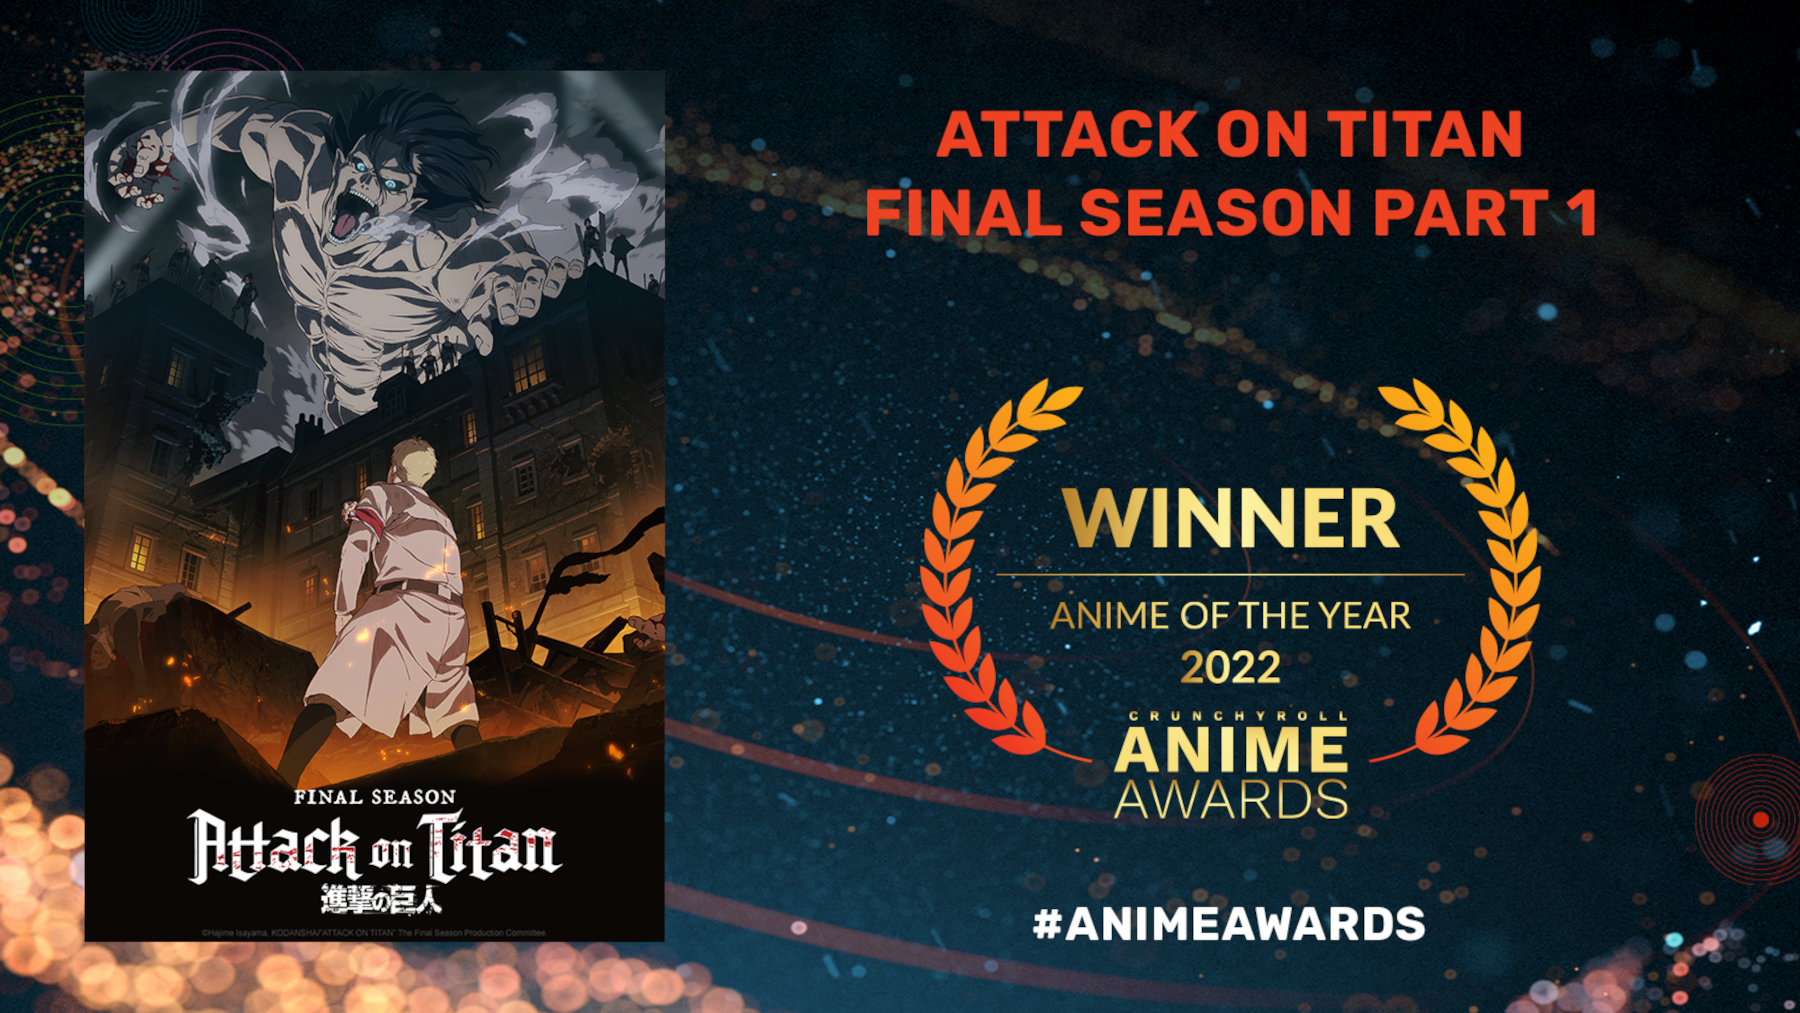 Crunchyroll 2022 Anime Awards graphic featuring Anime of the Year 'Attack on Titan'